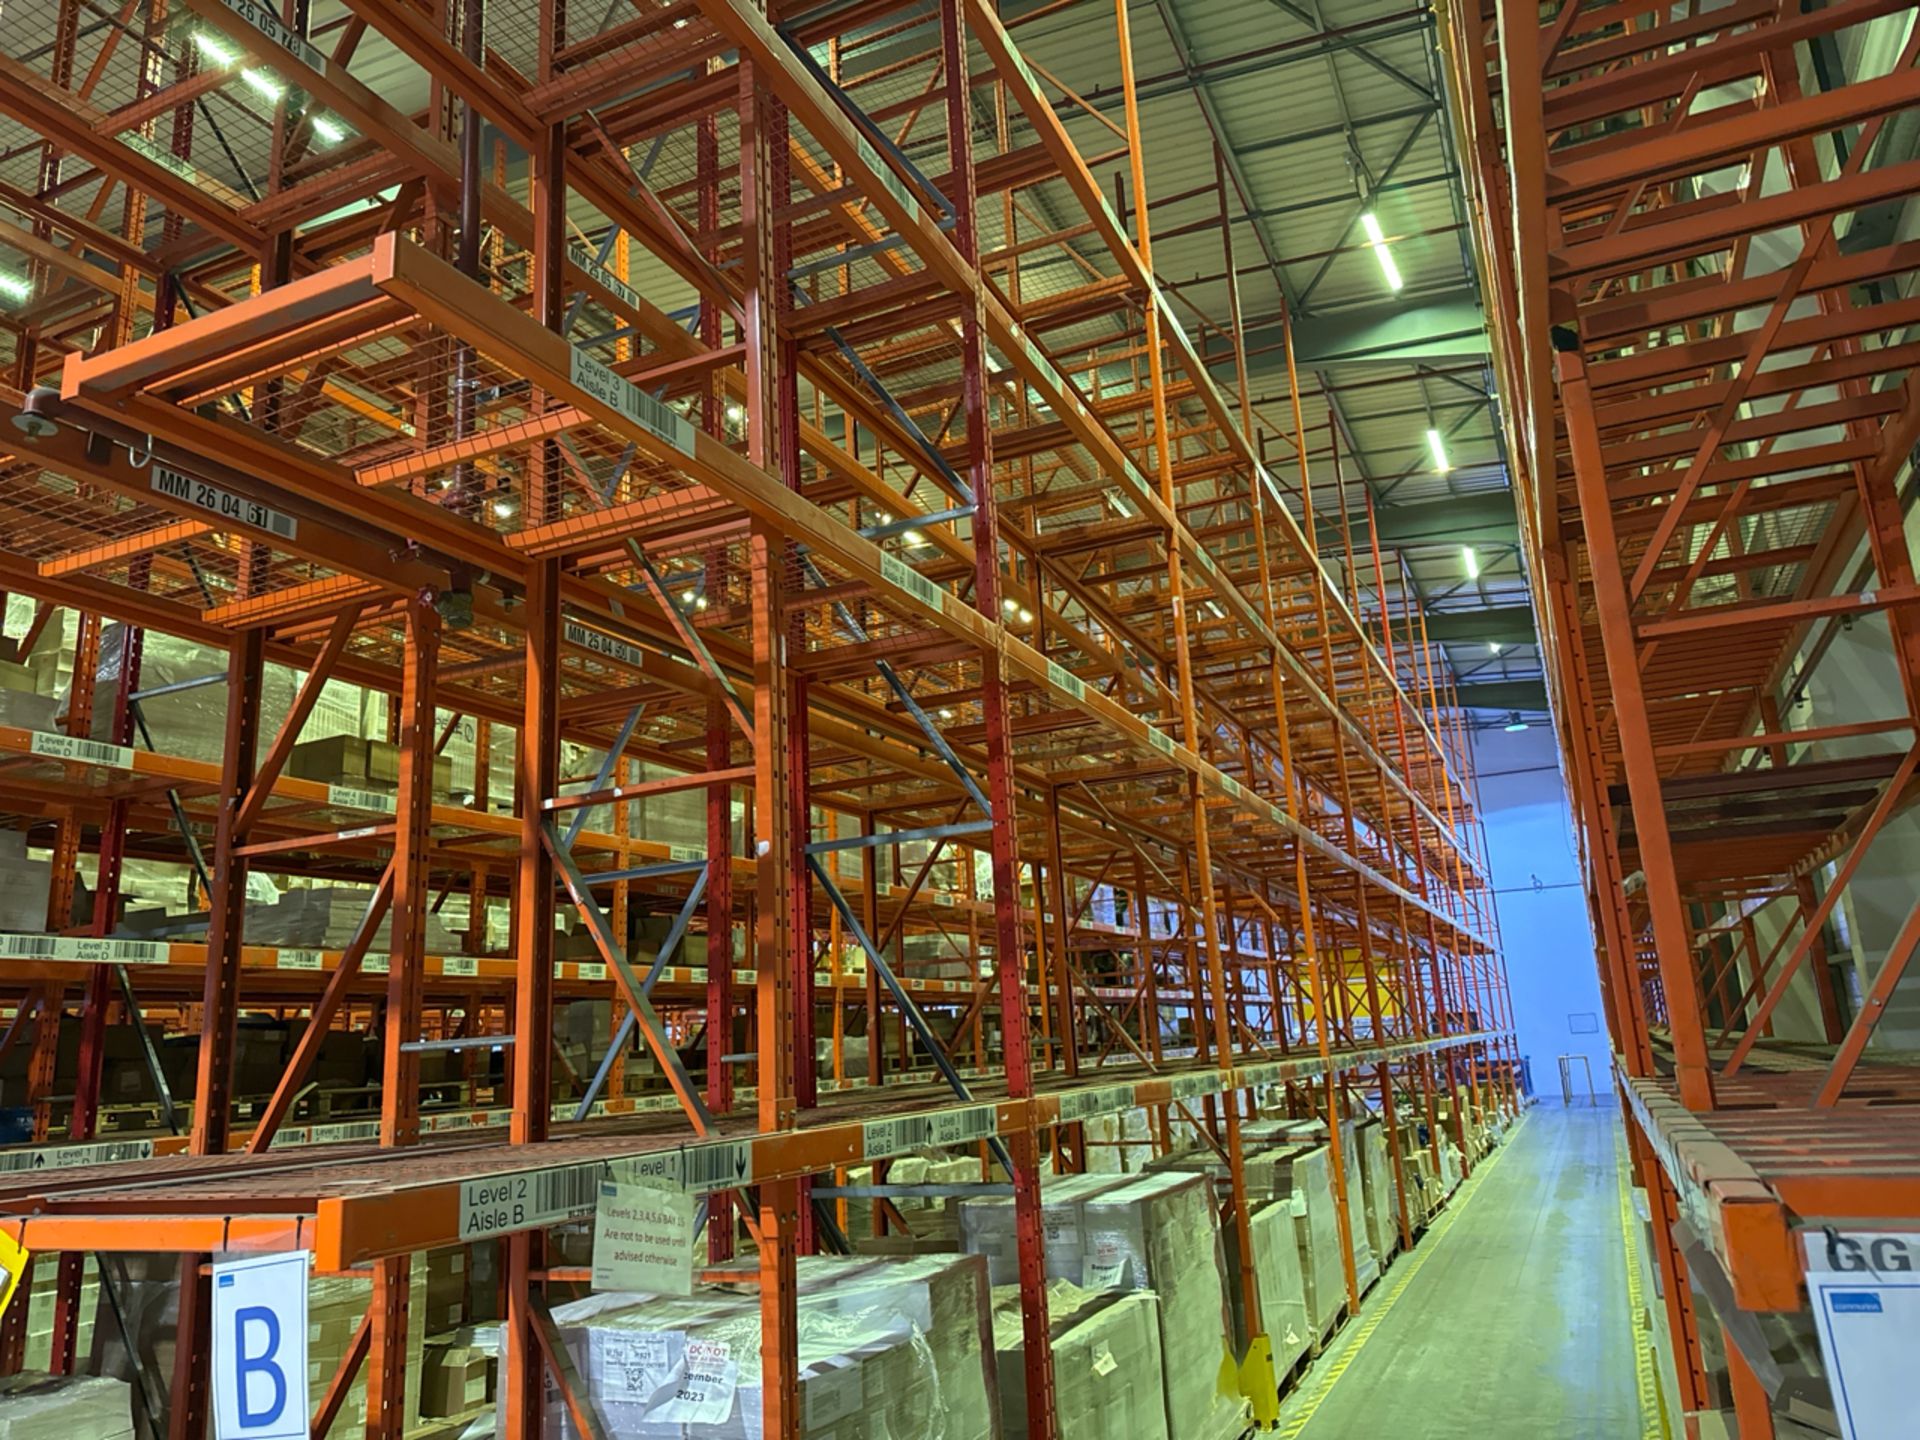 22 Bays Of Boltless Pallet Racking - Image 4 of 5